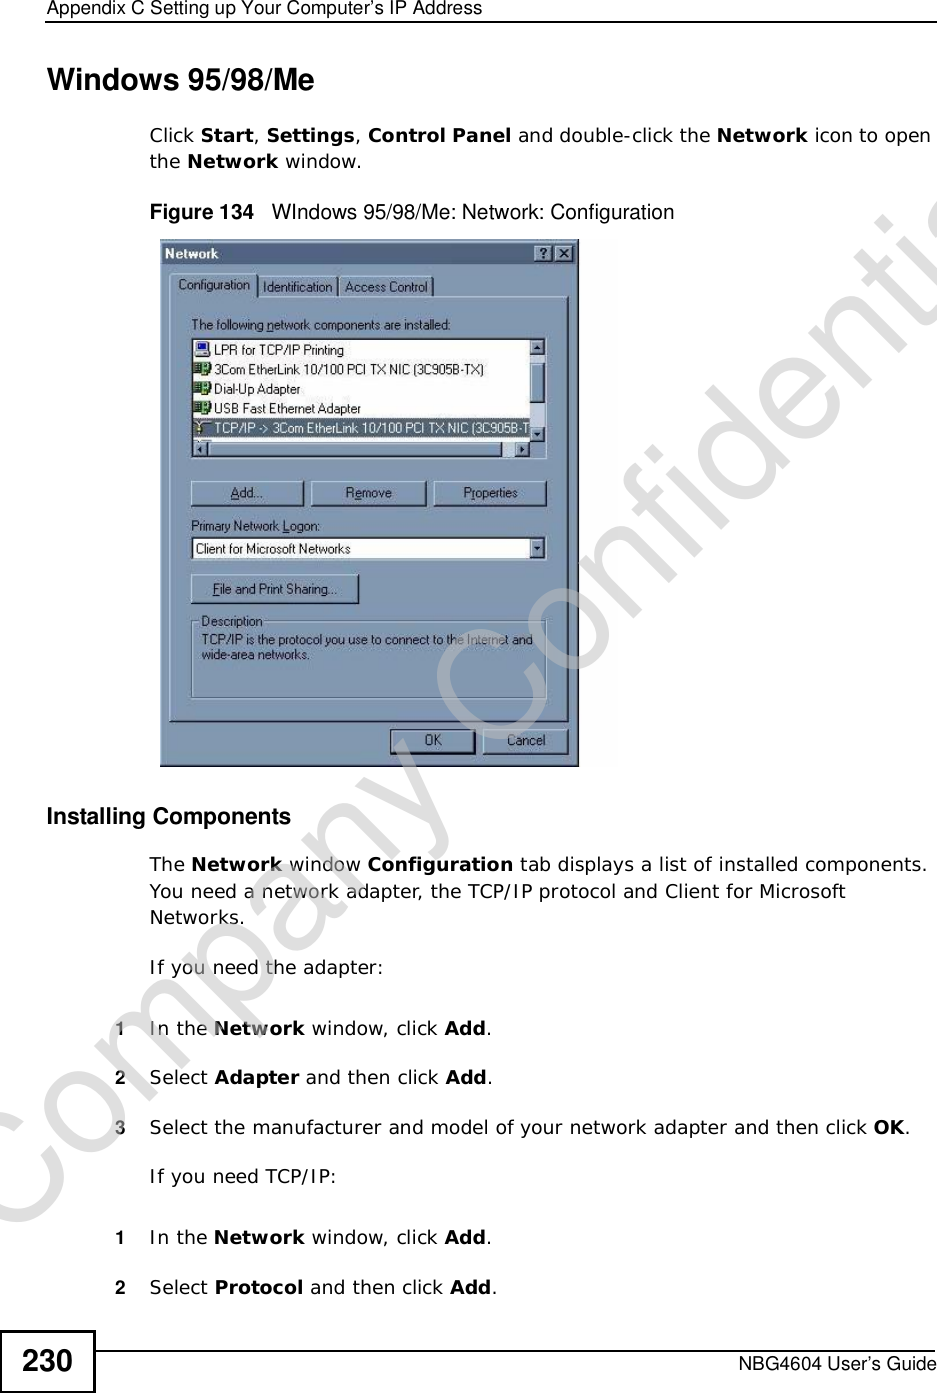 Appendix CSetting up Your Computer’s IP AddressNBG4604 User’s Guide230Windows 95/98/MeClick Start,Settings,Control Panel and double-click the Network icon to open the Network window.Figure 134   WIndows 95/98/Me: Network: ConfigurationInstalling ComponentsThe Network window Configuration tab displays a list of installed components. You need a network adapter, the TCP/IP protocol and Client for Microsoft Networks.If you need the adapter:1In the Network window, click Add.2Select Adapter and then click Add.3Select the manufacturer and model of your network adapter and then click OK.If you need TCP/IP:1In the Network window, click Add.2Select Protocol and then click Add.Company Confidential